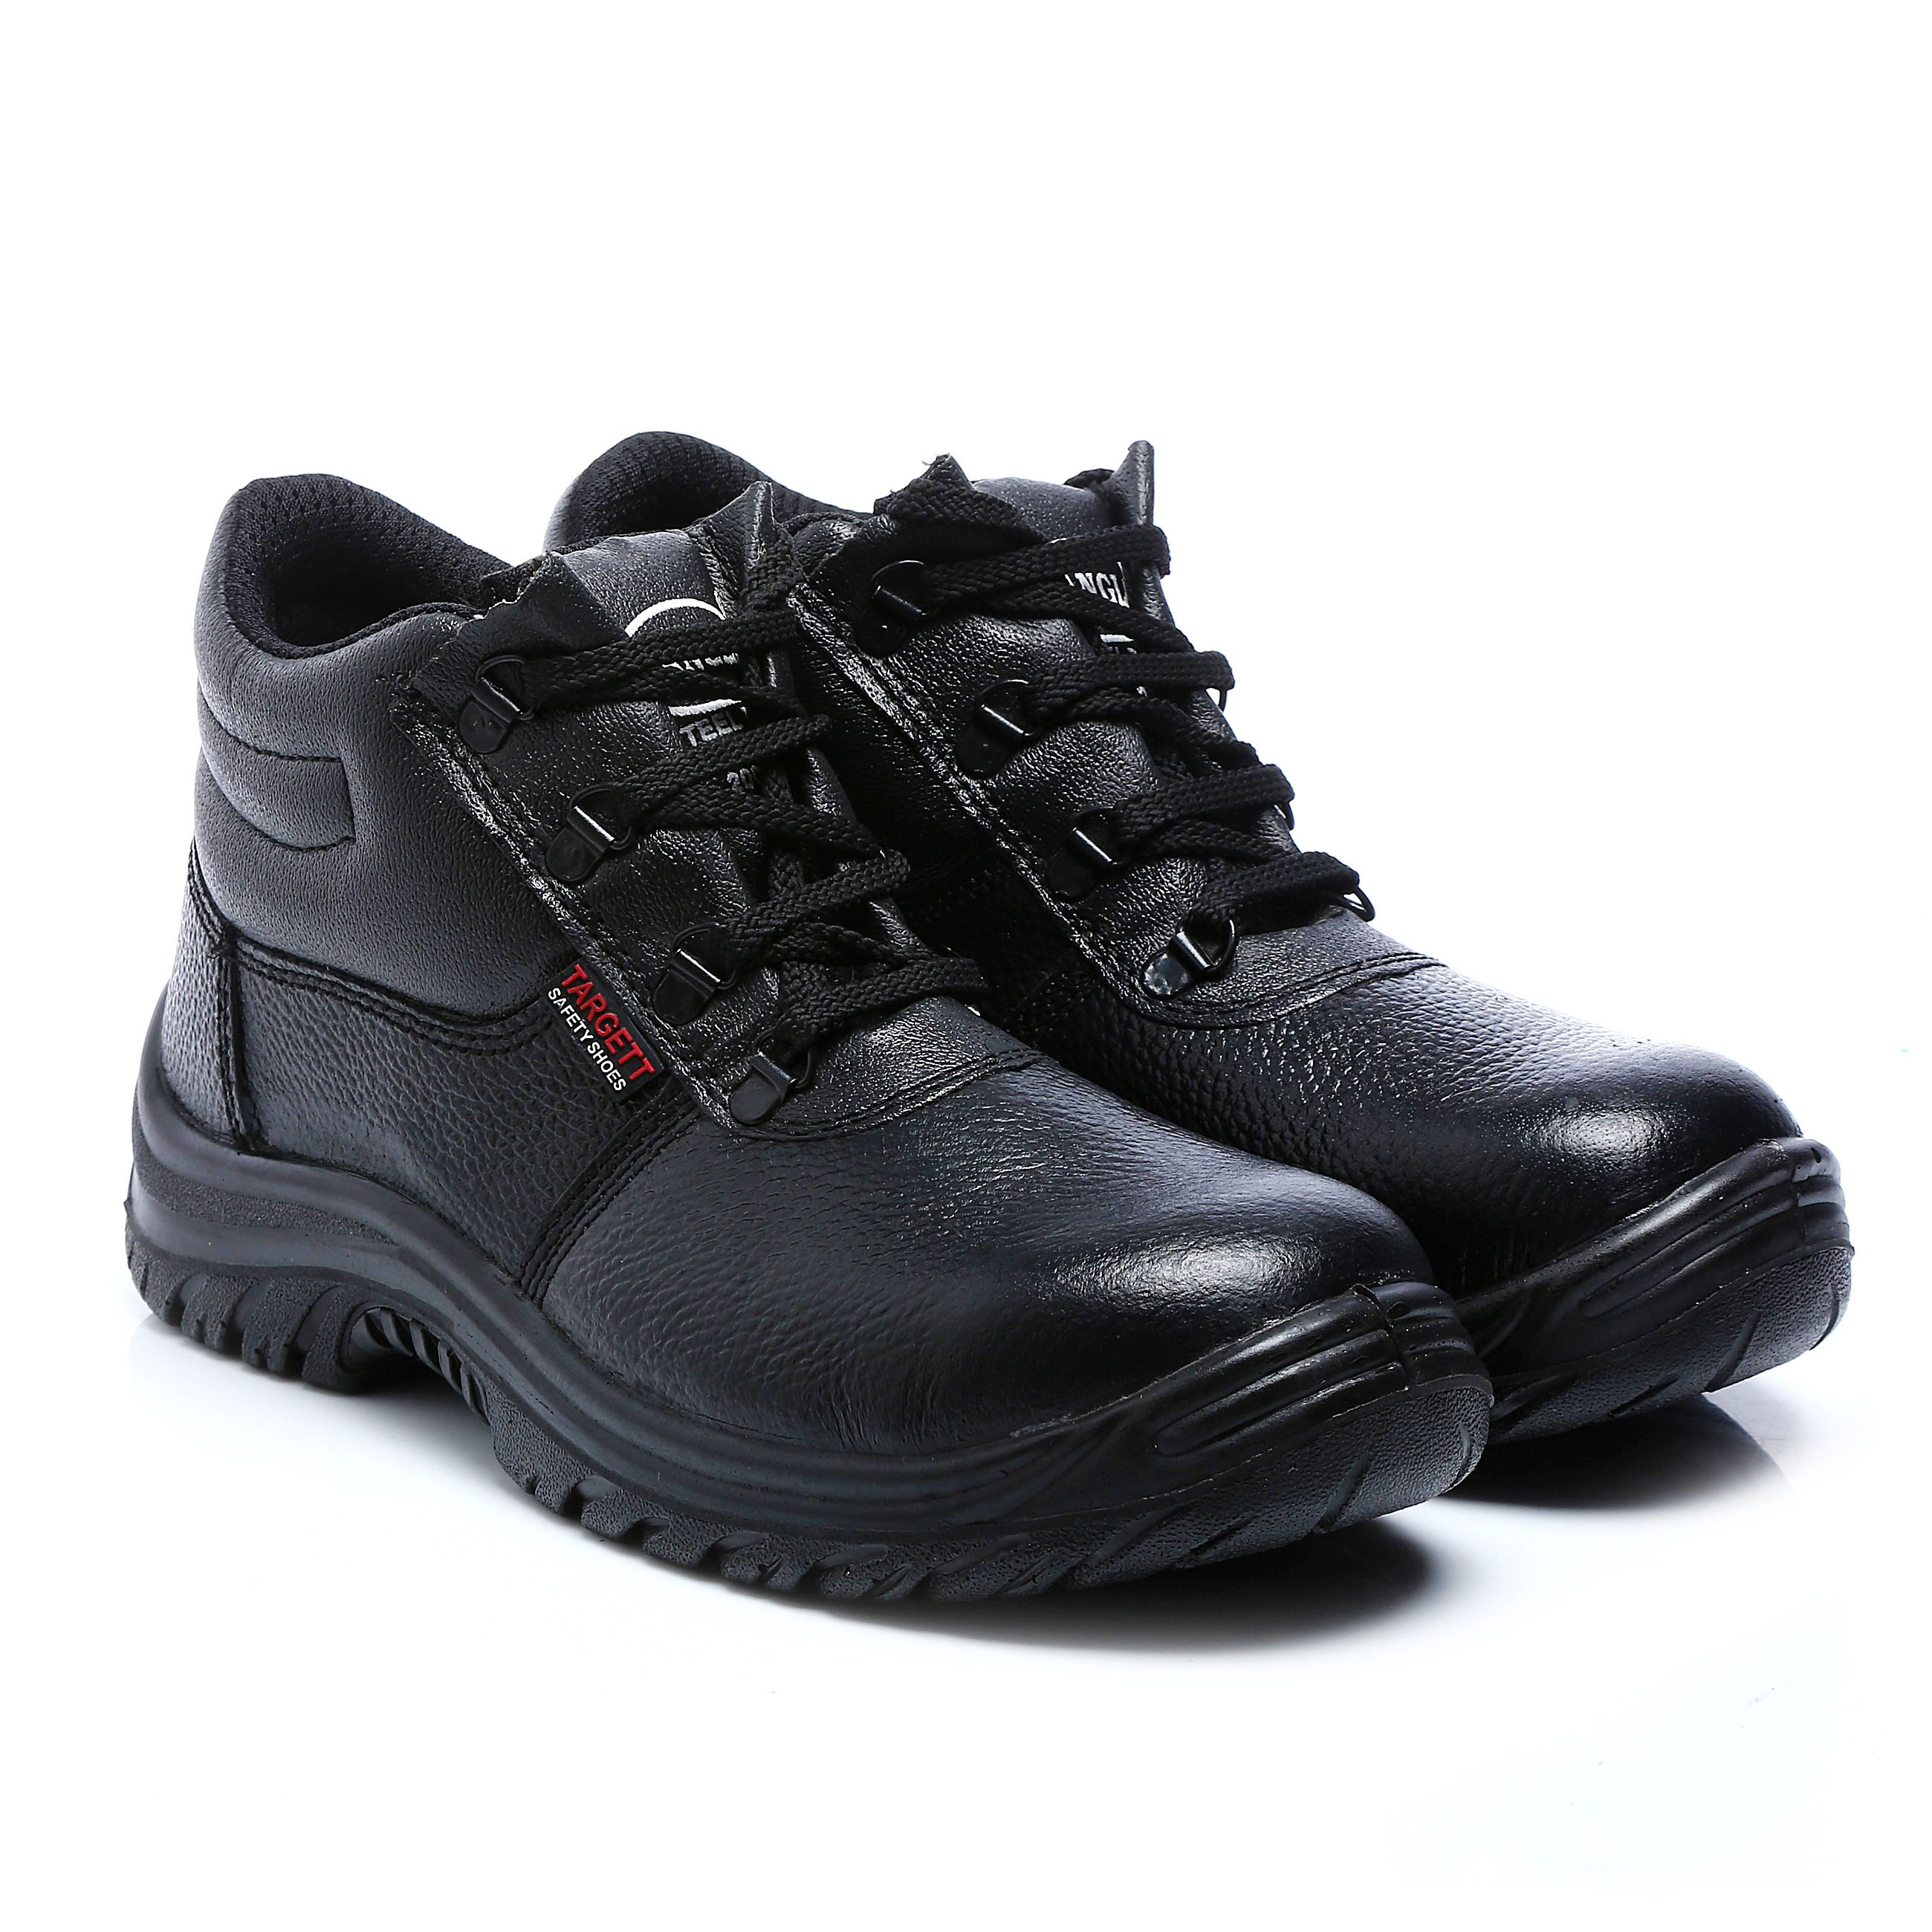 ISI safety Shoes